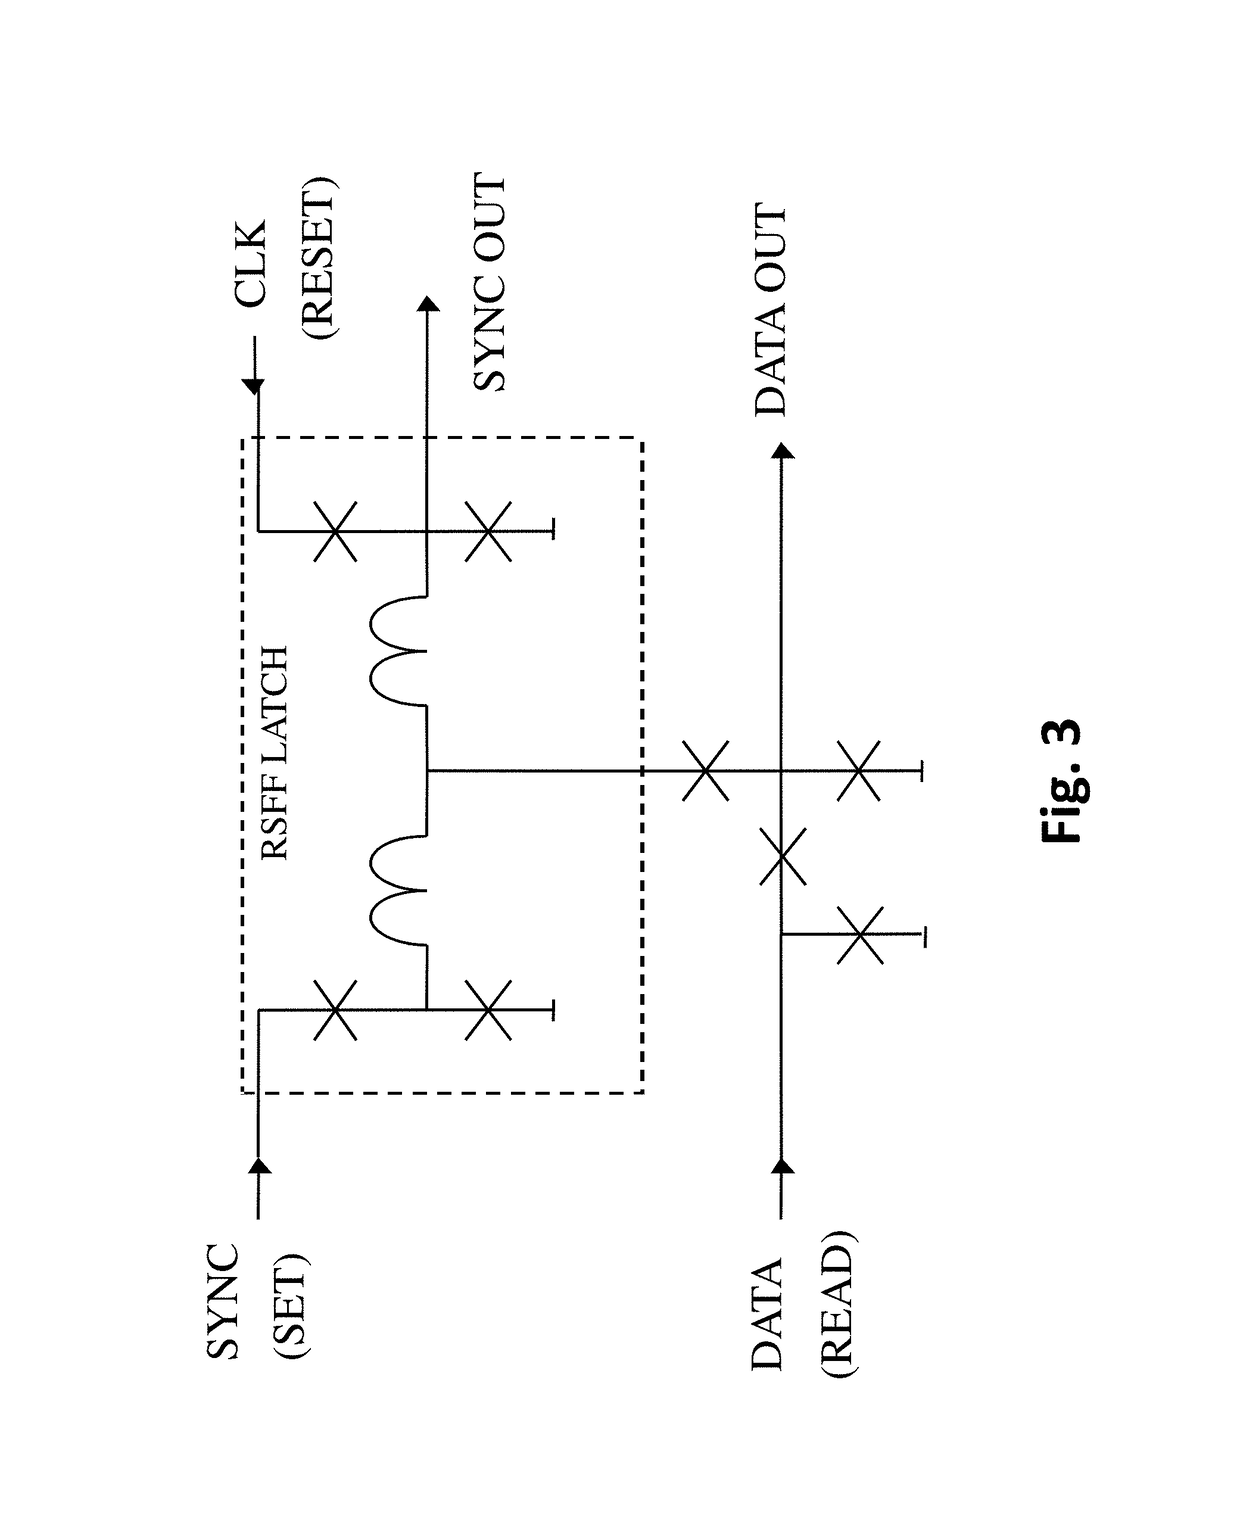 System and method for array diagnostics in superconducting integrated circuit